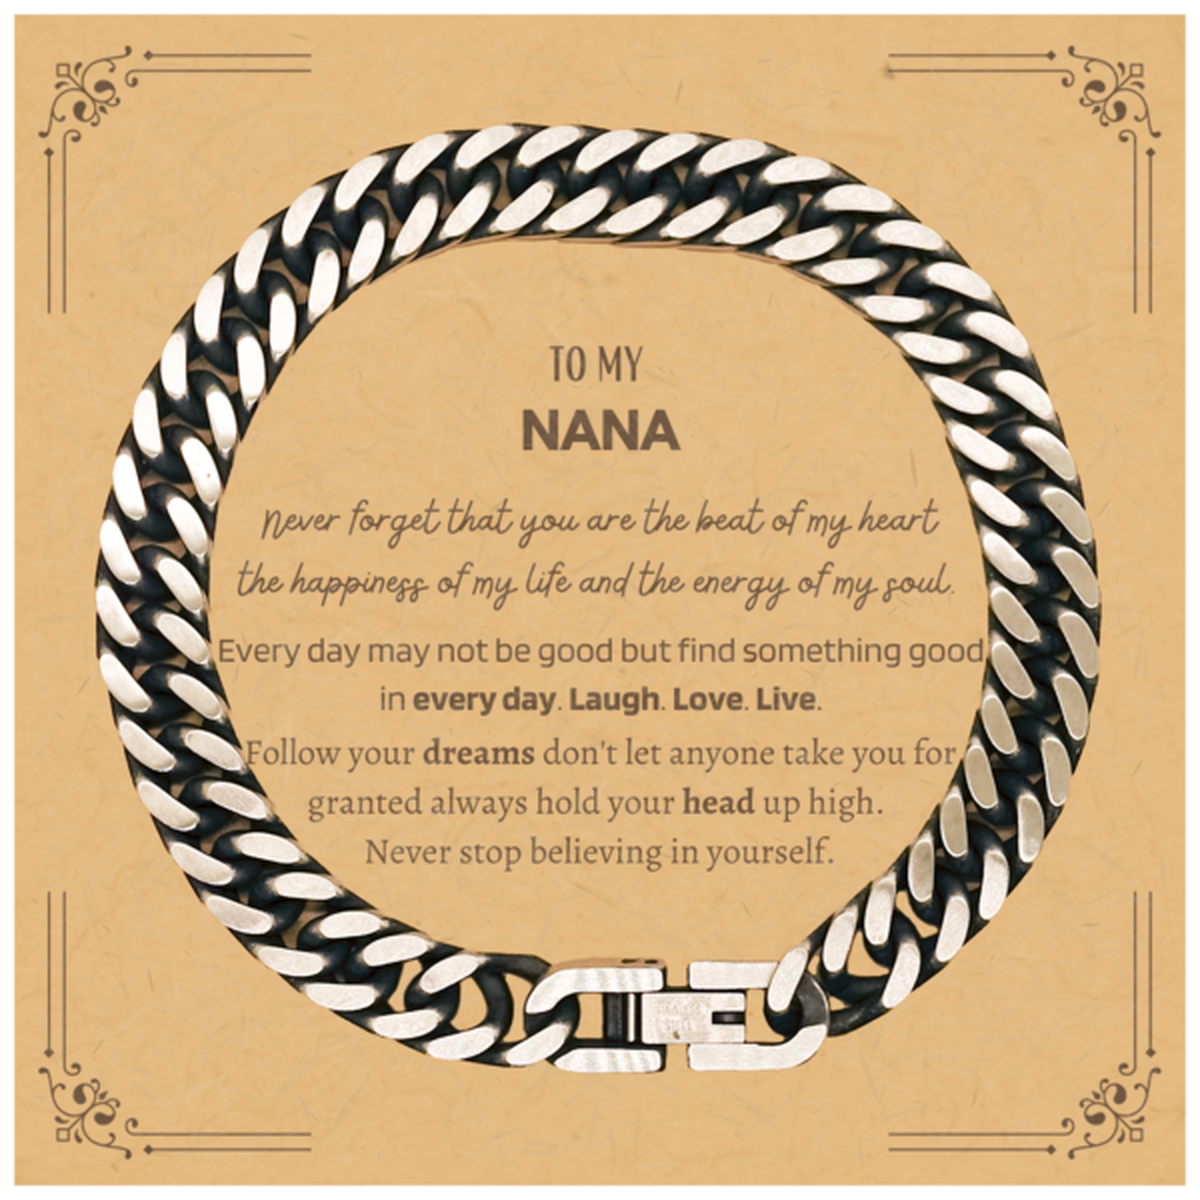 To My Nana Message Card Gifts, Christmas Nana Cuban Link Chain Bracelet Present, Birthday Unique Motivational For Nana, To My Nana Never forget that you are the beat of my heart the happiness of my life and the energy of my soul